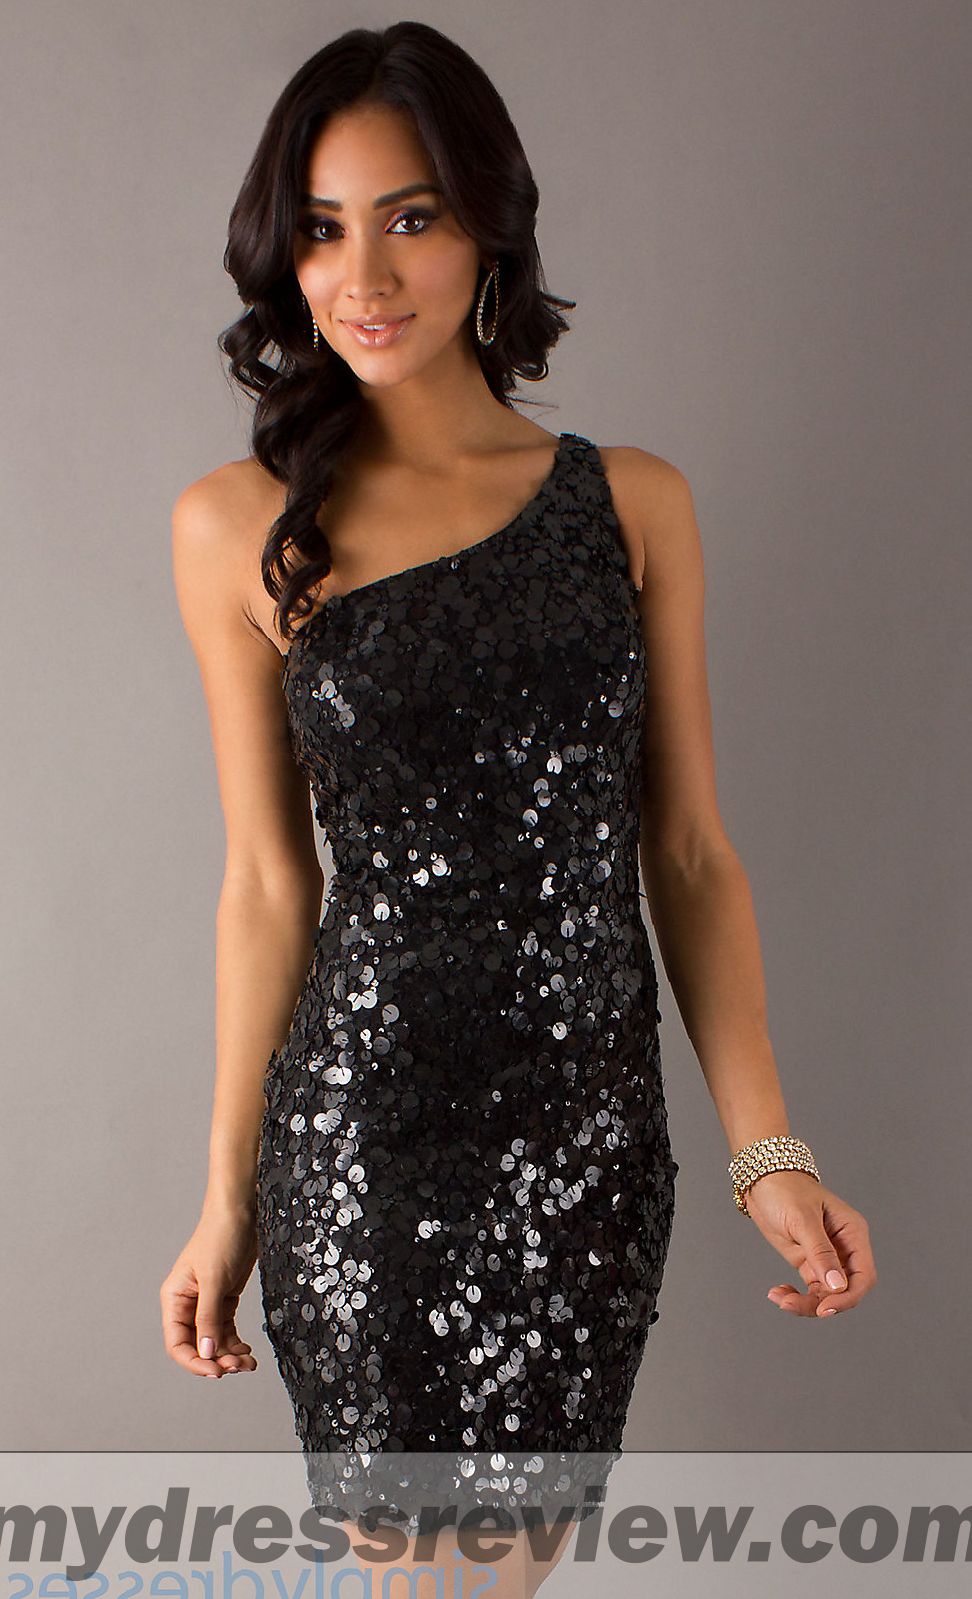 Evening Sequin Dresses And Top 10 Ideas - MyDressReview